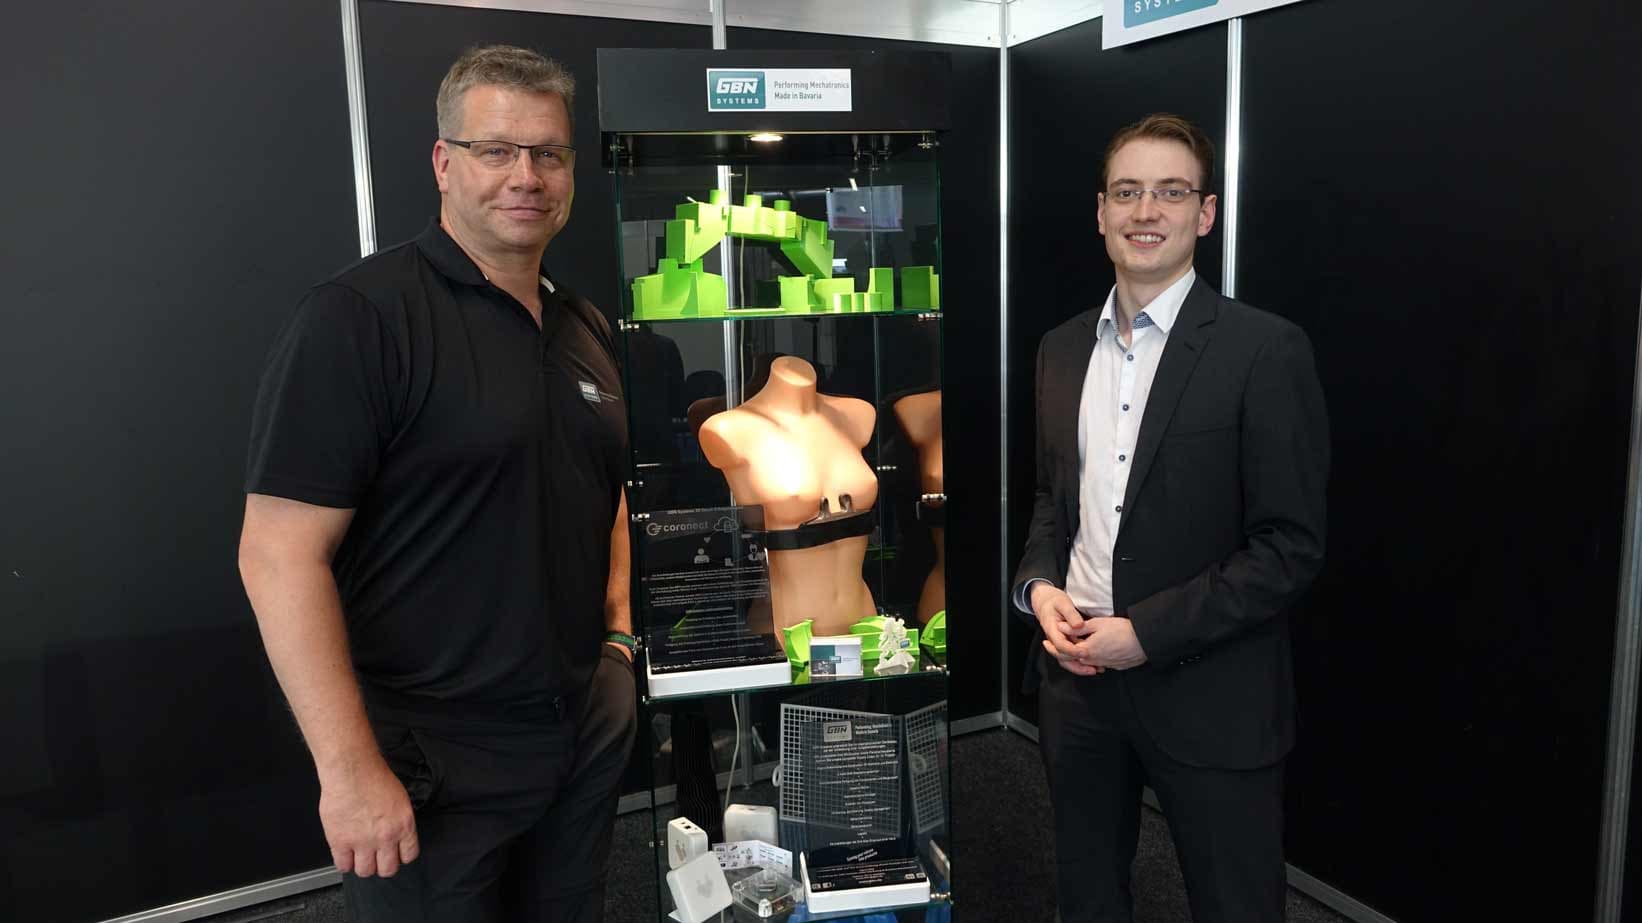 GBN Systems (Harry Flint) and coronect (Norman Krüger) show premiere of coronect chestbelt